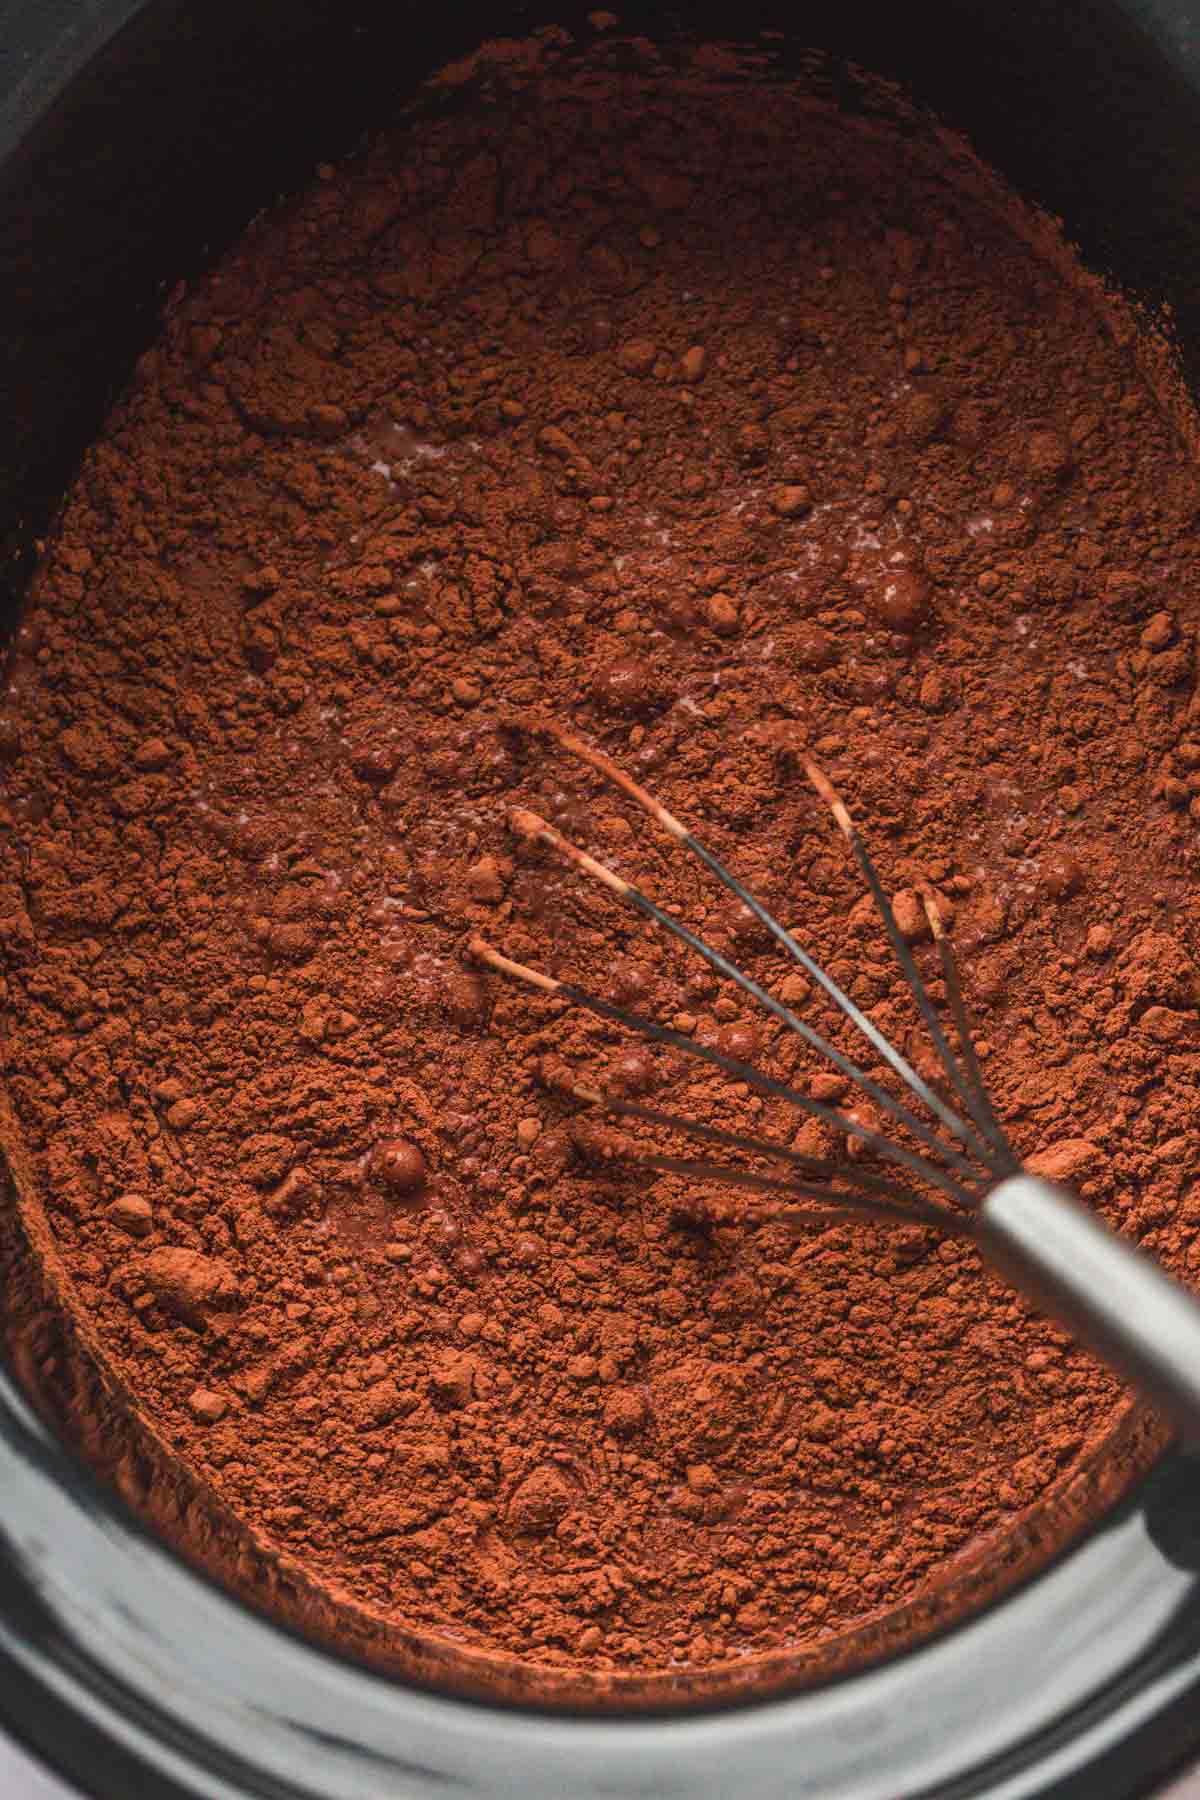 Whisking the milk with cocoa powder, sugar, vanilla, and chocolate chips